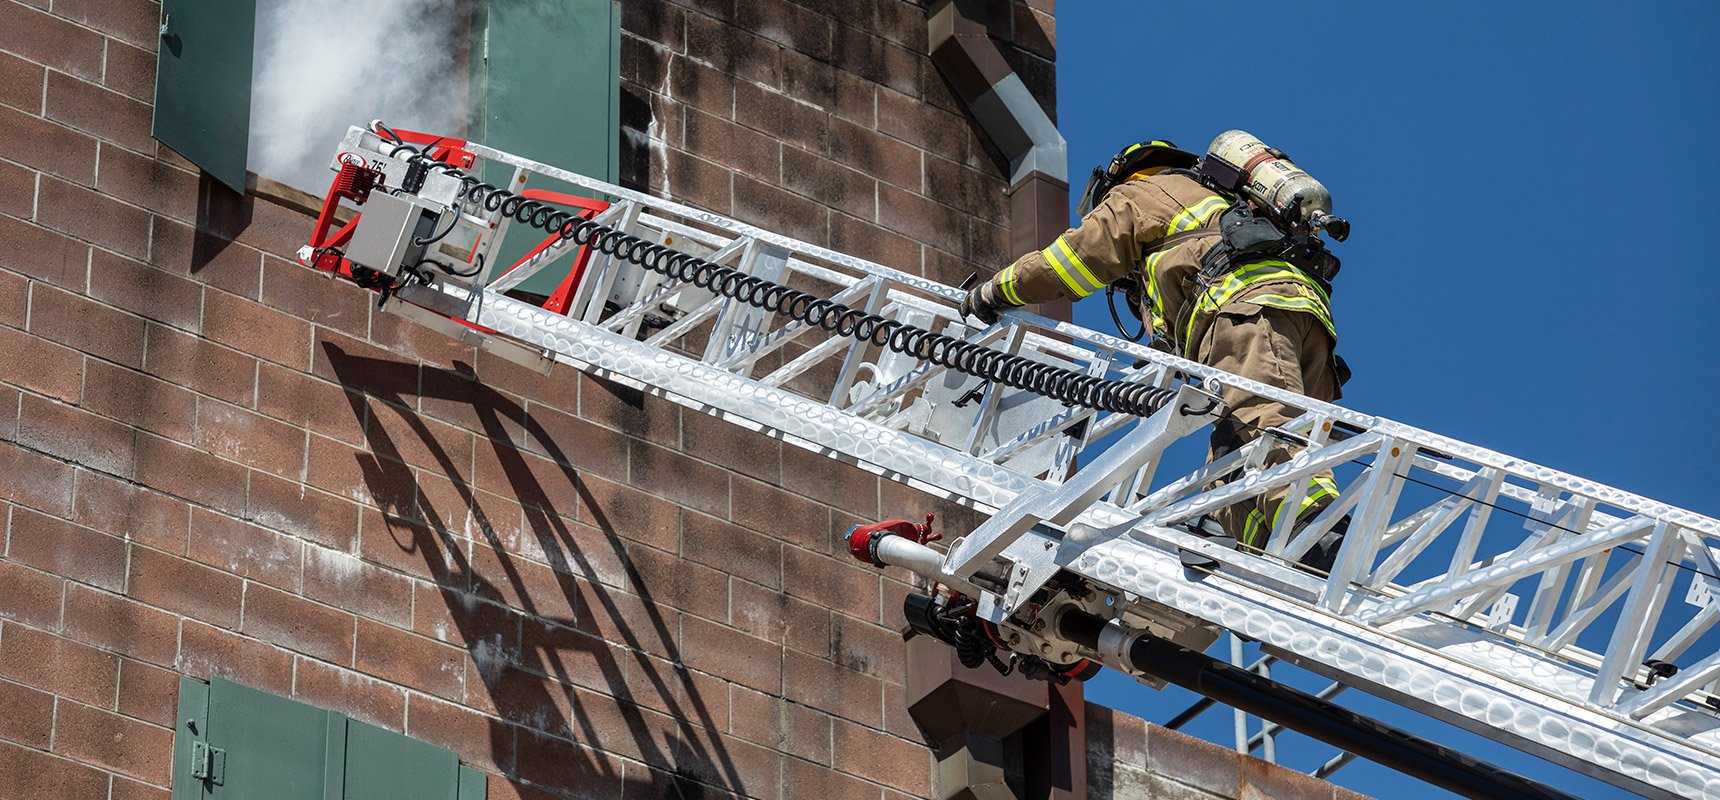 A firefighter in full turnout gear ascents an aerial ladder device toward an open window as smoke billows out. 